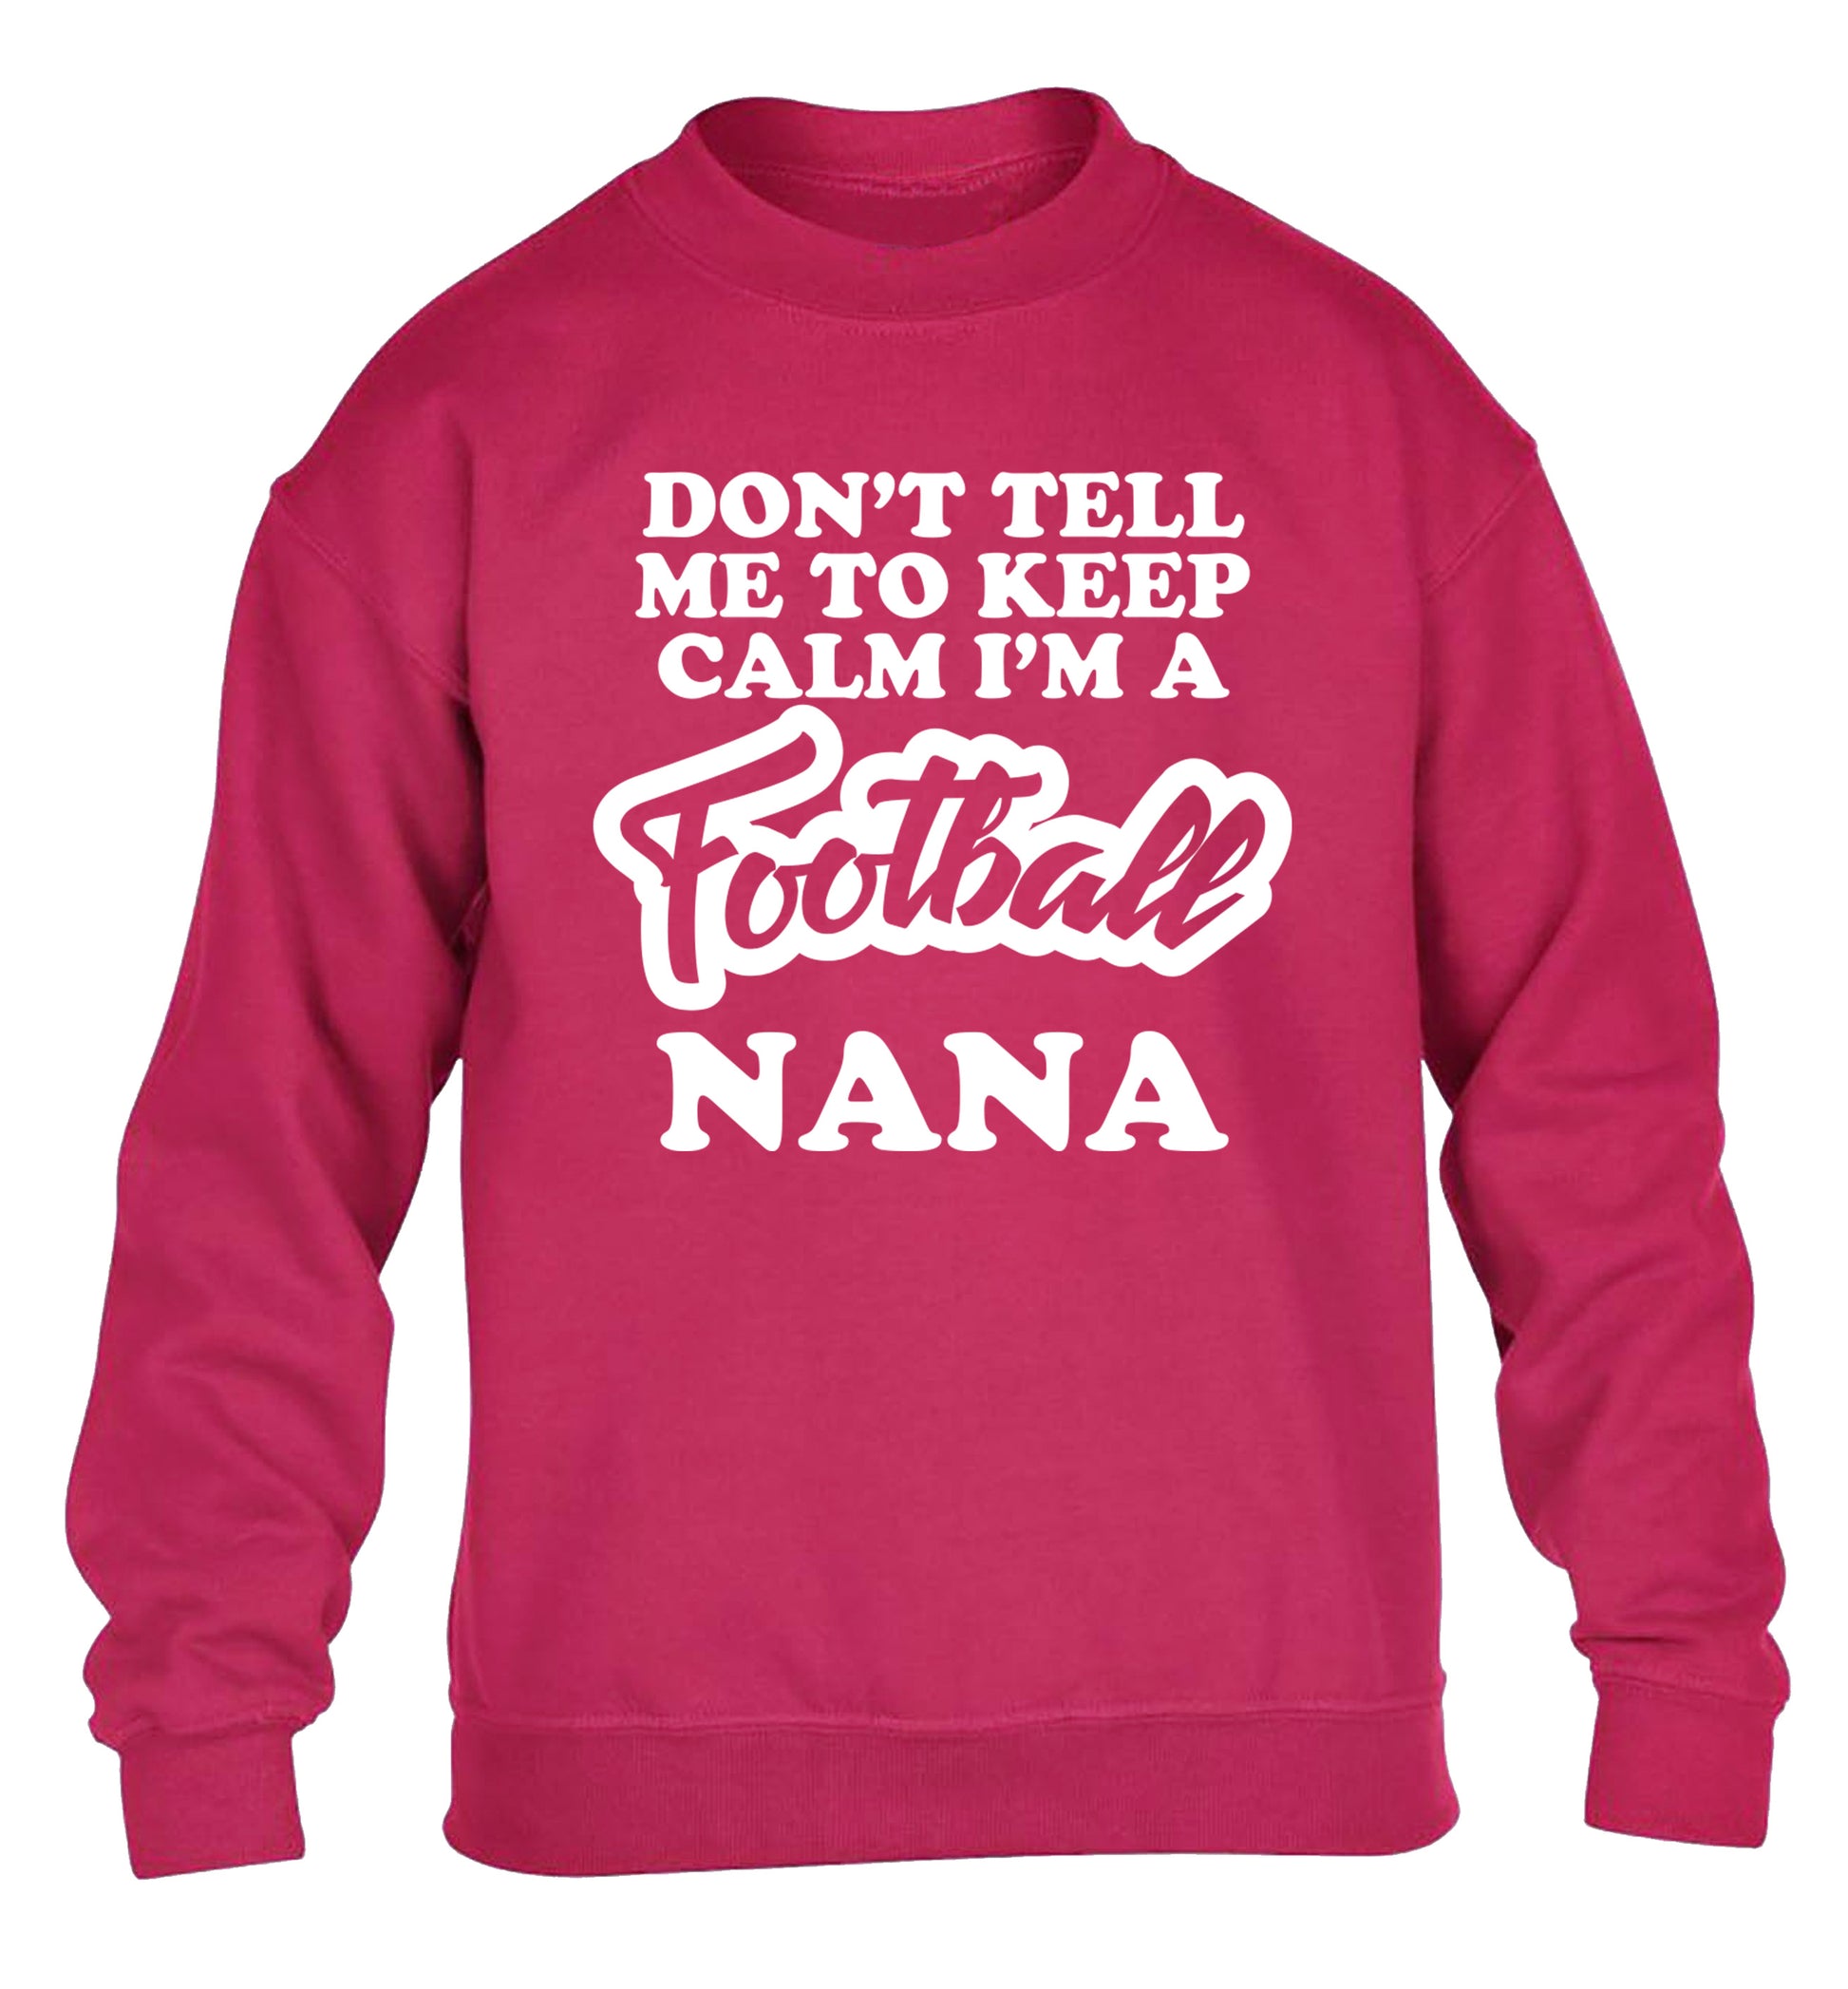 Don't tell me to keep calm I'm a football nana children's pink sweater 12-14 Years